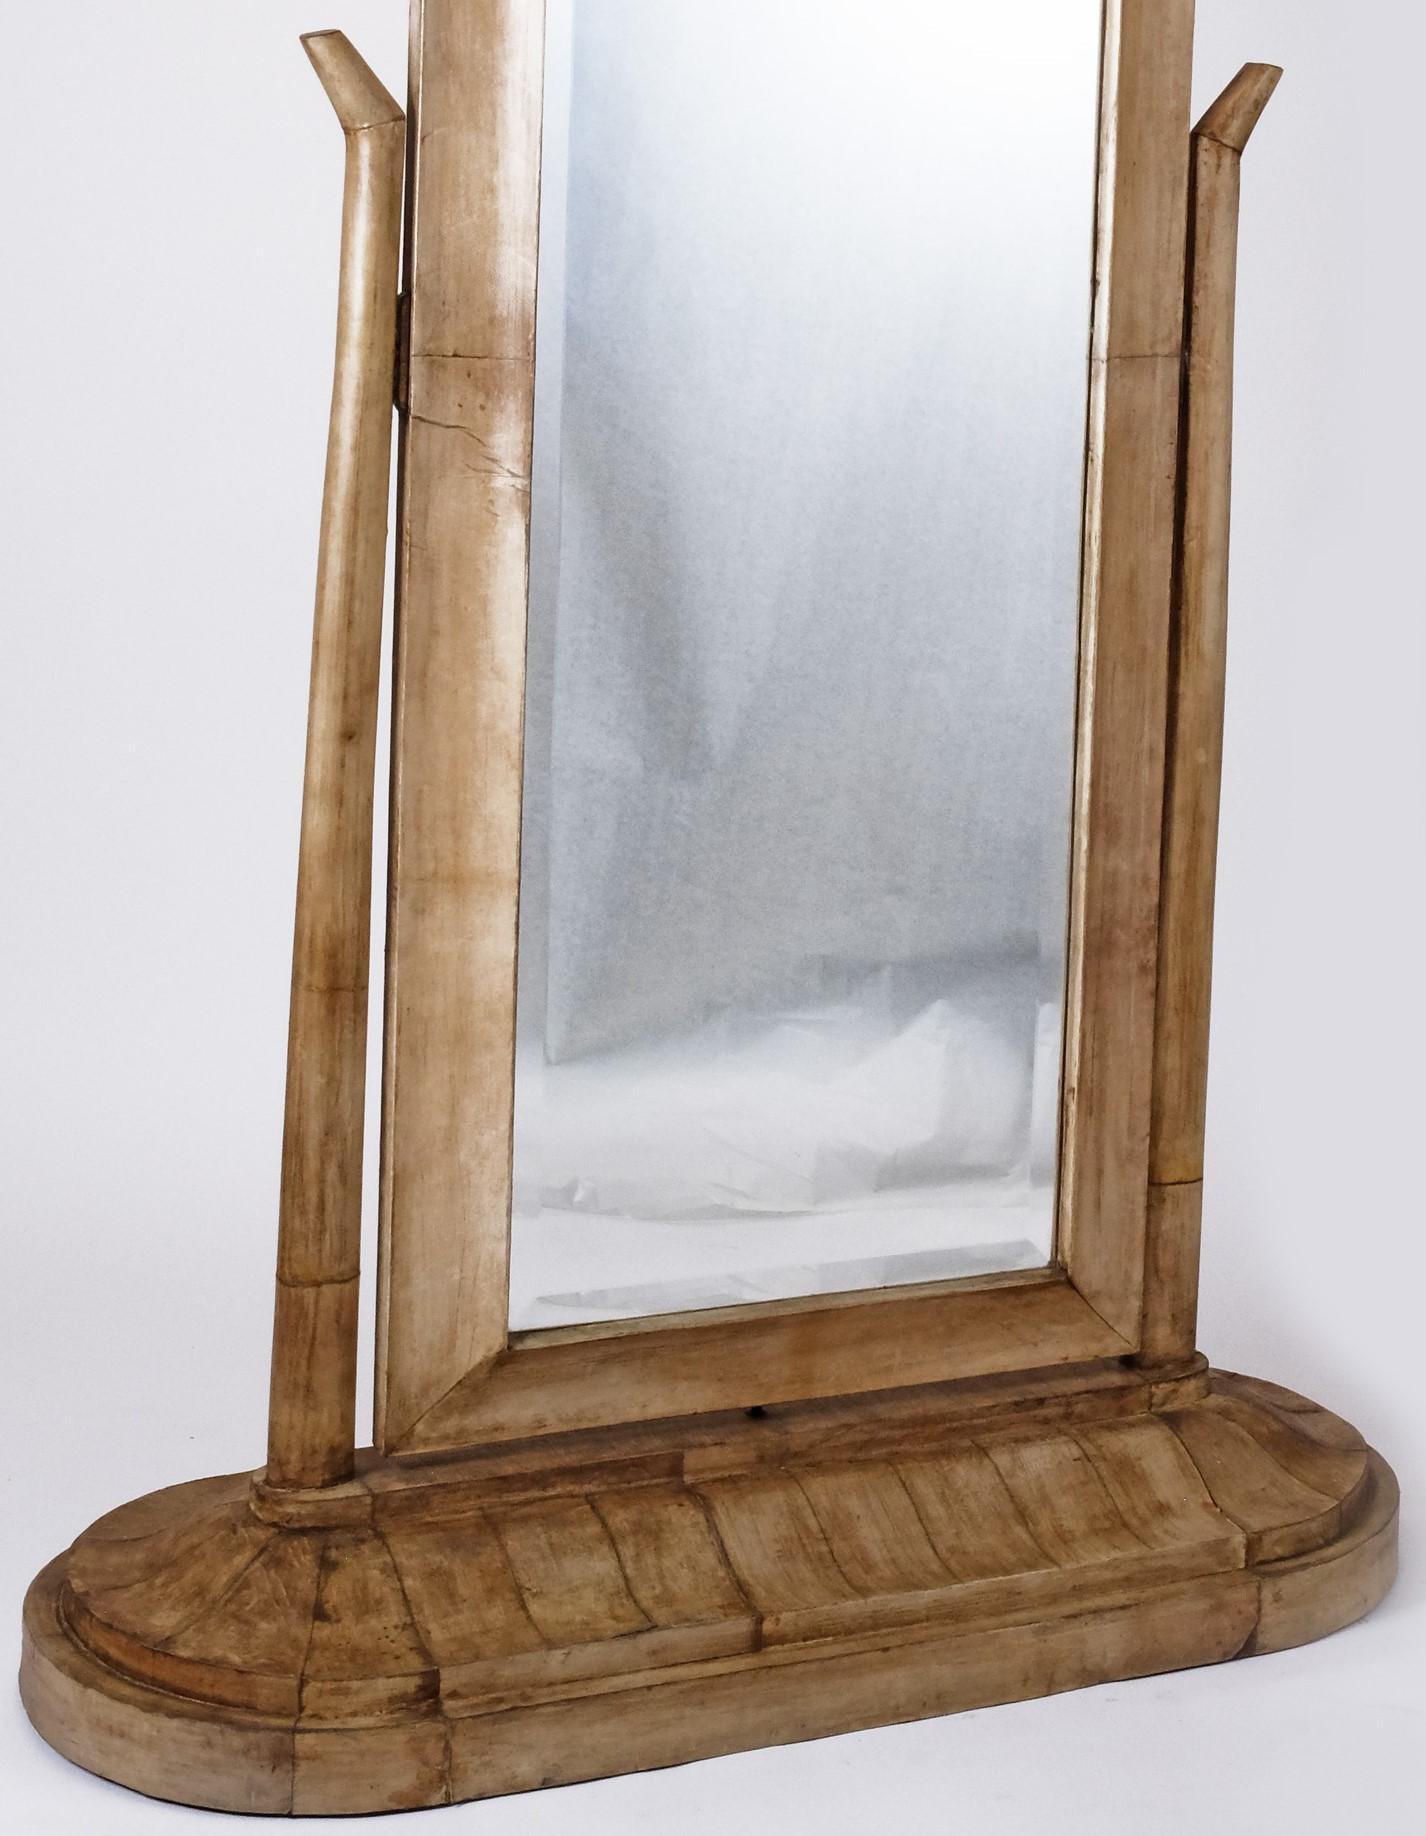 Art Deco parchment free standing mirror. Circa, 1920's. The back of the piece is also in parchment finish, in its entirety.

The mirror pivots and stands on a wide base providing total stability. This is a wonderful example of the style and